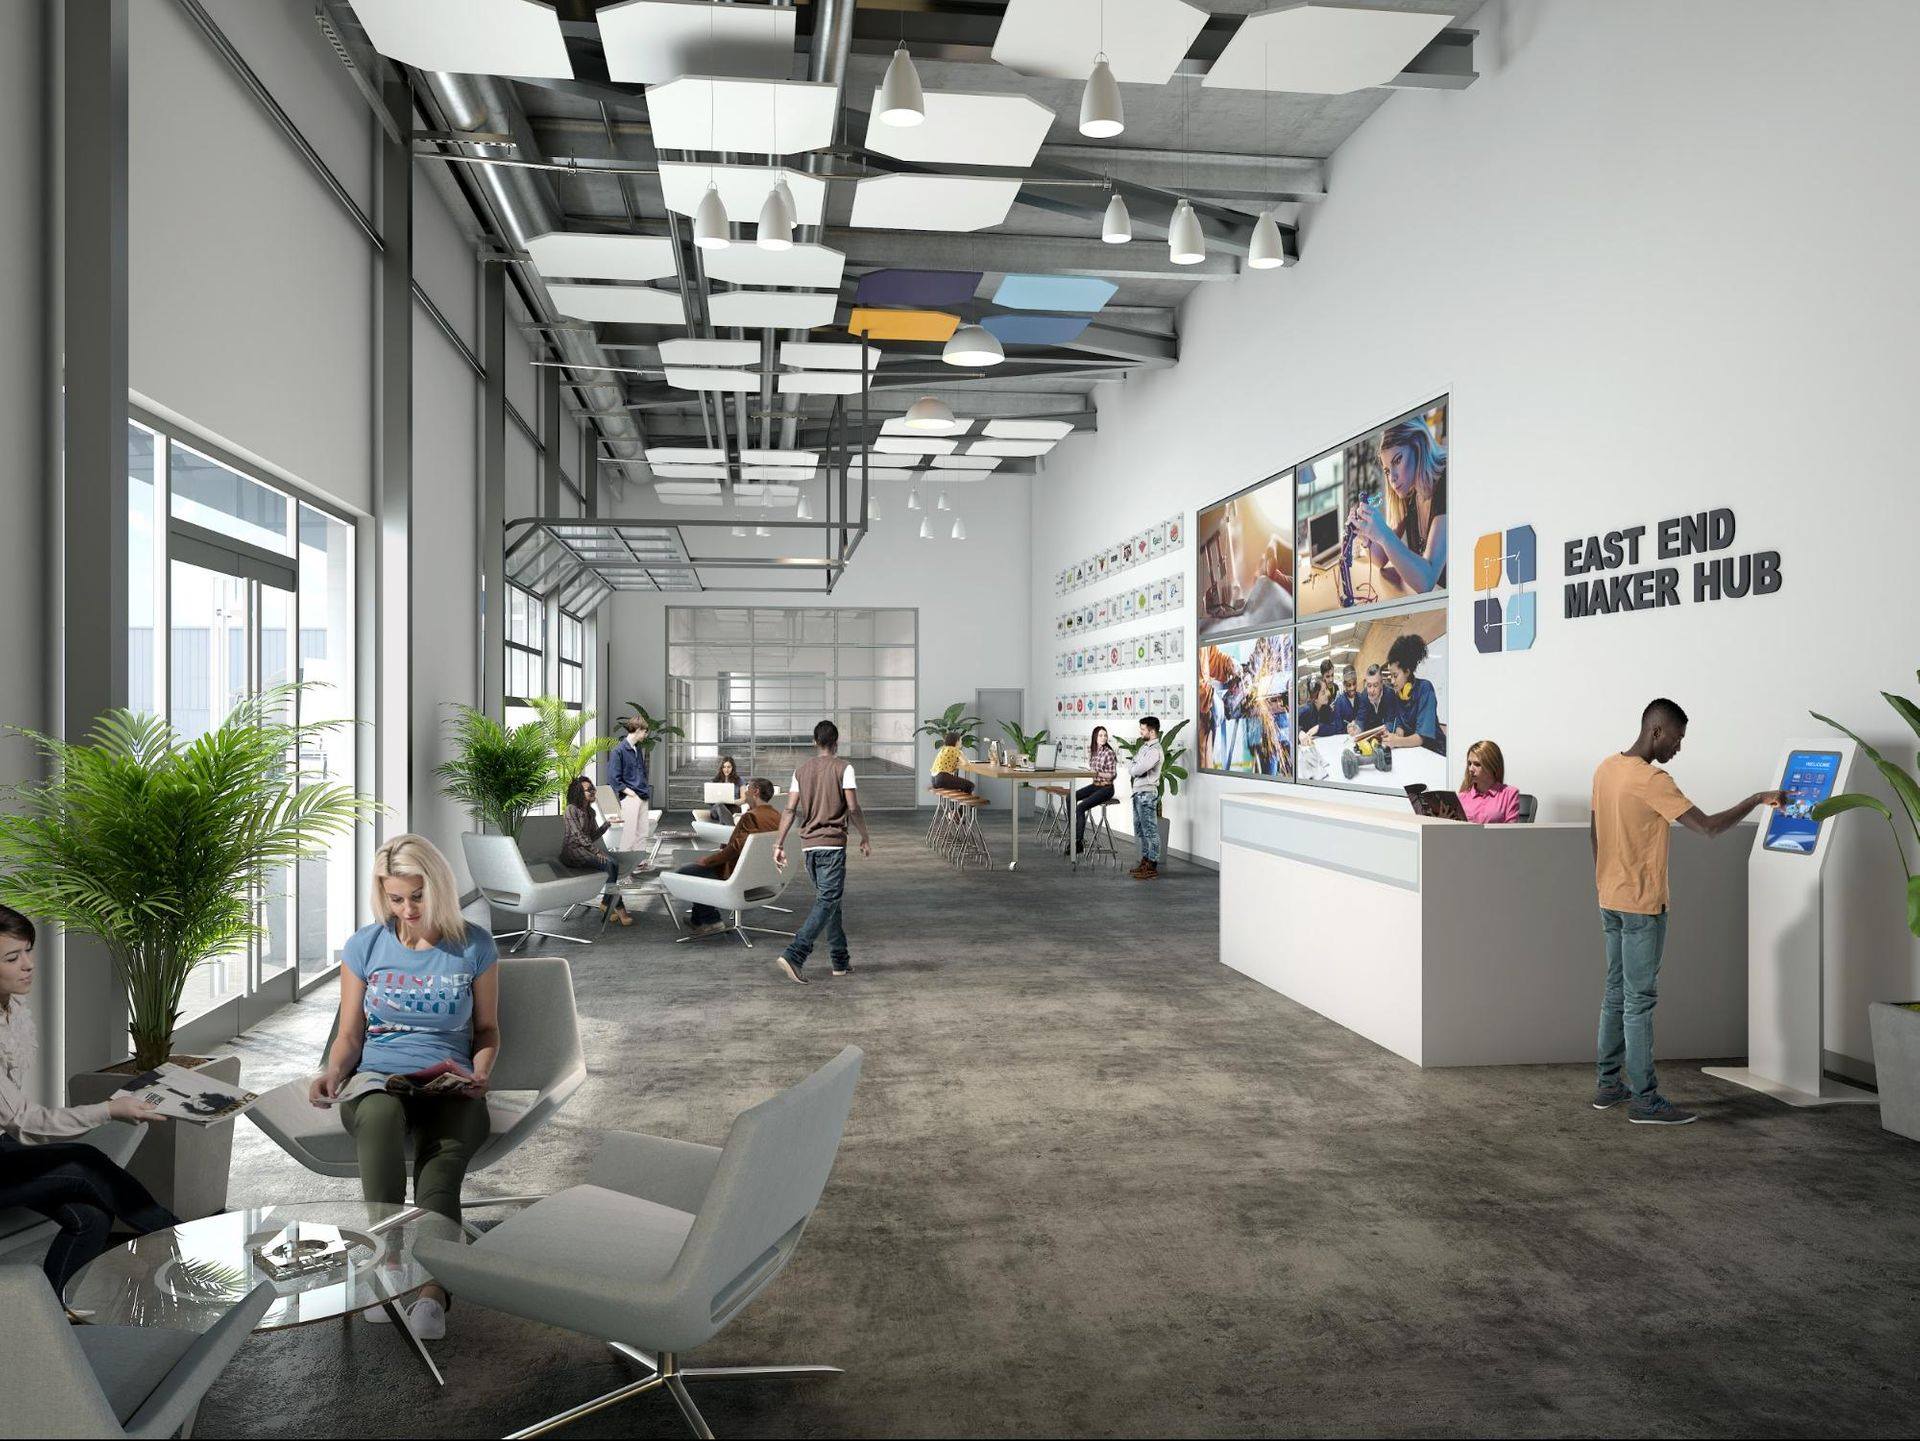 A rendering of the East End Maker Hub Lobby